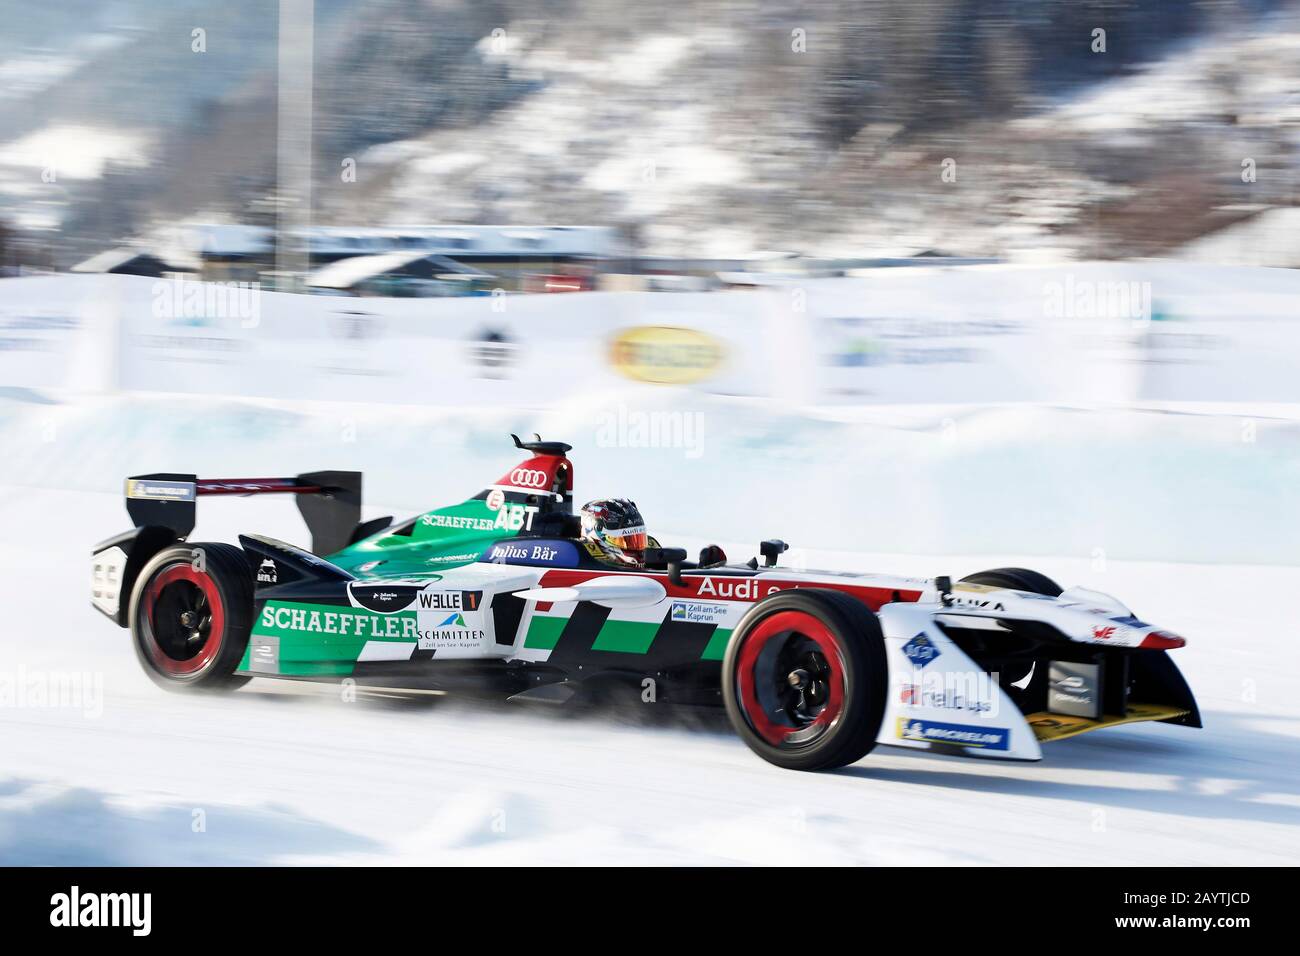 GP Ice Race 2019, Audi etron FE05 Formula E vehicle with works driver Daniel Abt at the wheel, pulling along, Zell am See, Austria Stock Photo